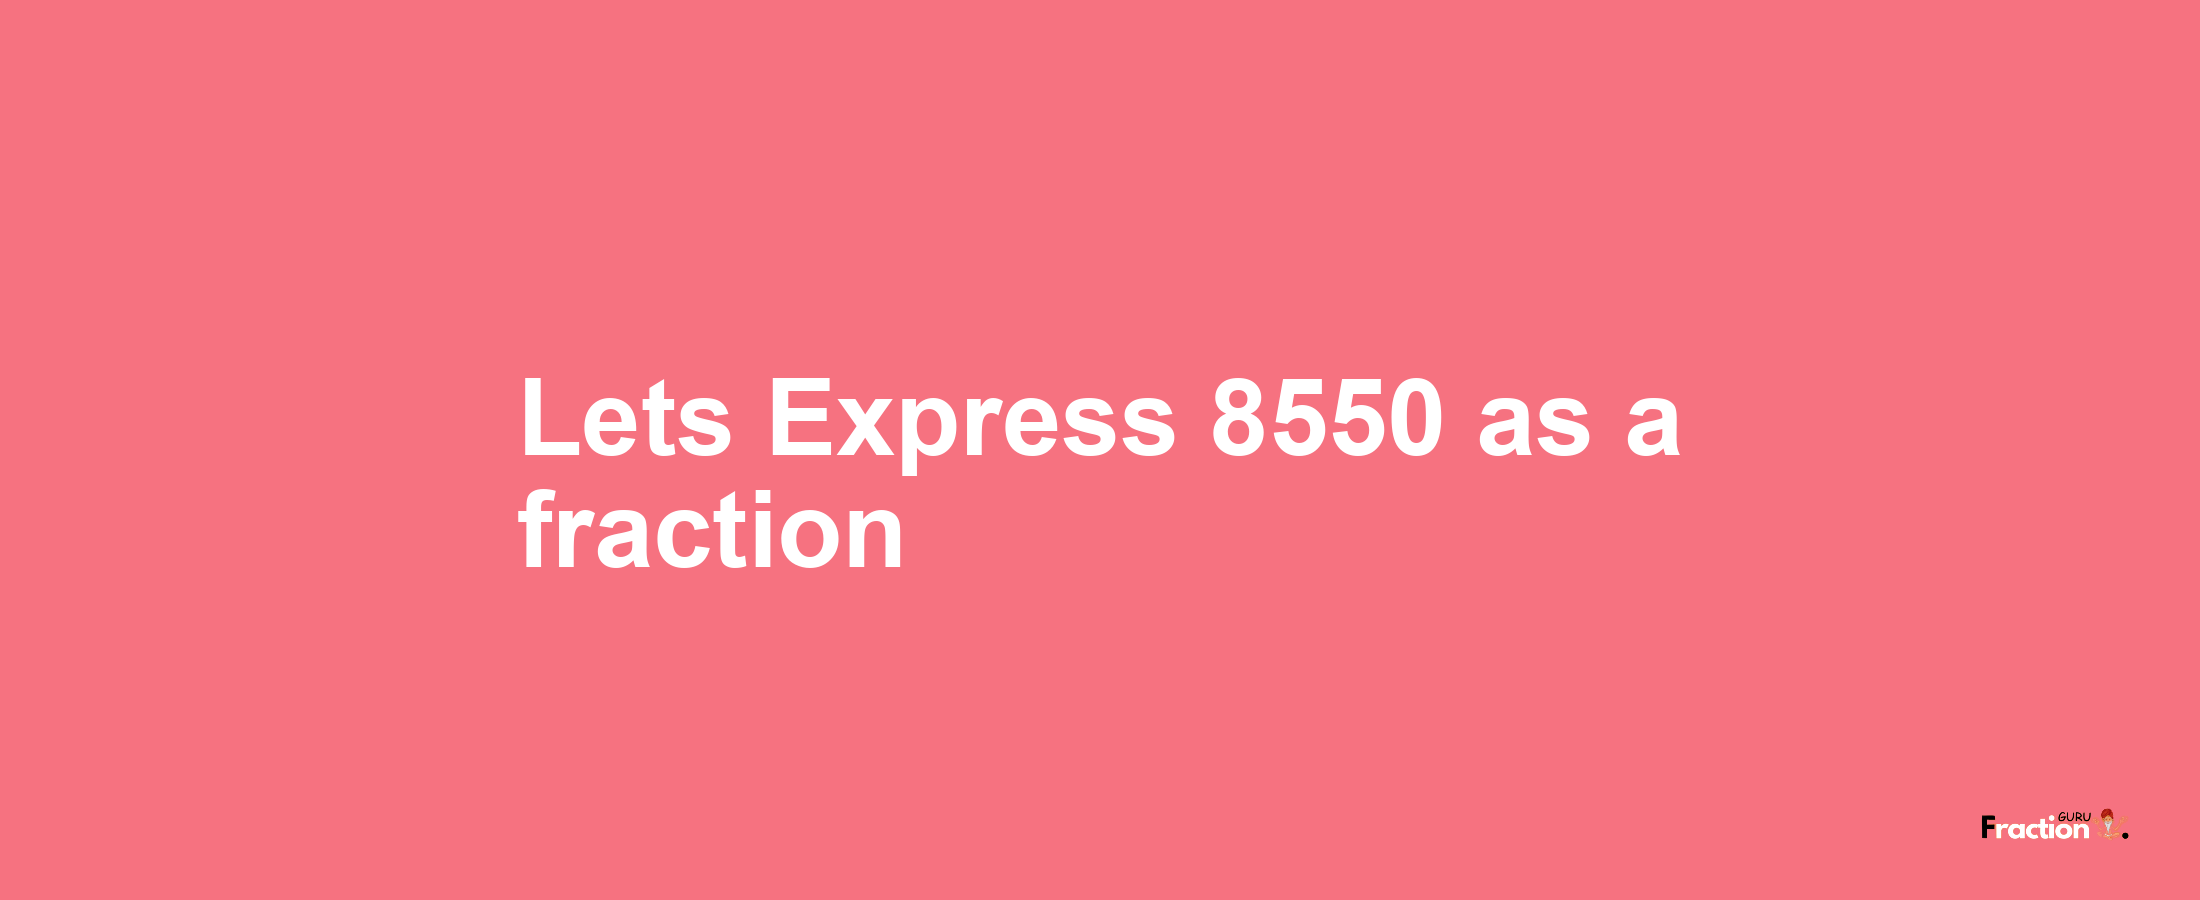 Lets Express 8550 as afraction